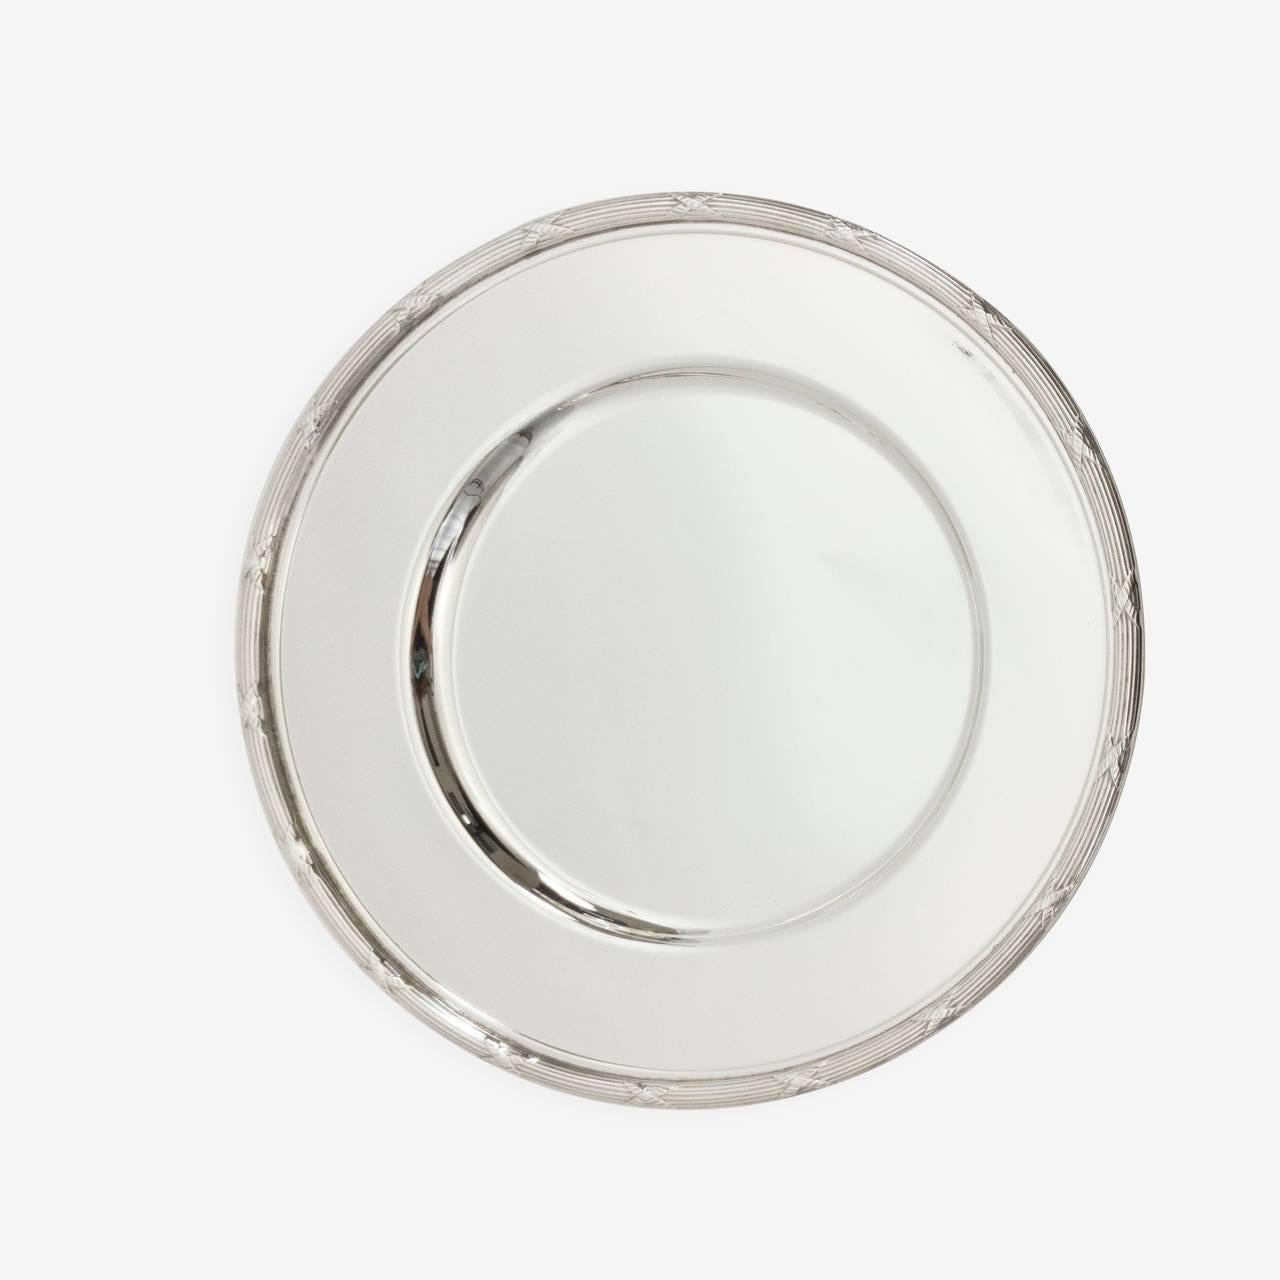 Whether you are setting your table for a formal or informal occasion, service plates offer the hostess an opportunity to set the atmosphere for the decor of the table with timeless elegance. These stunning under plates are always larger than the